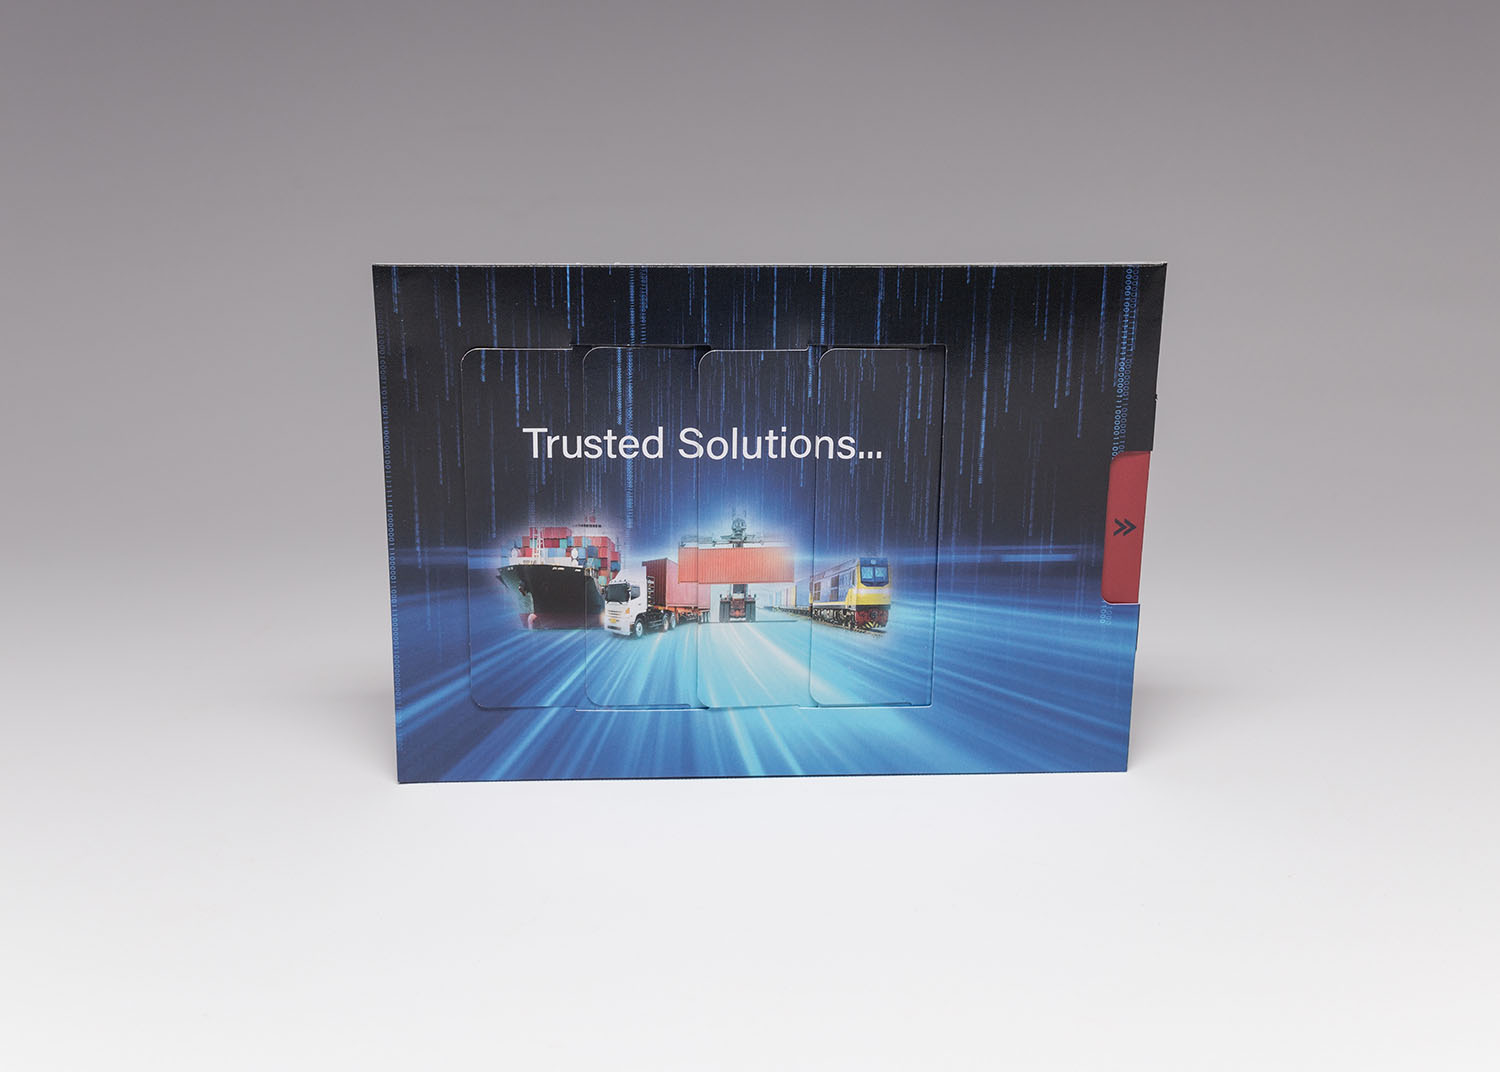 Stand out from the competition at a trade show with our Magic Changing Picture. Sure to show the shift from old to new